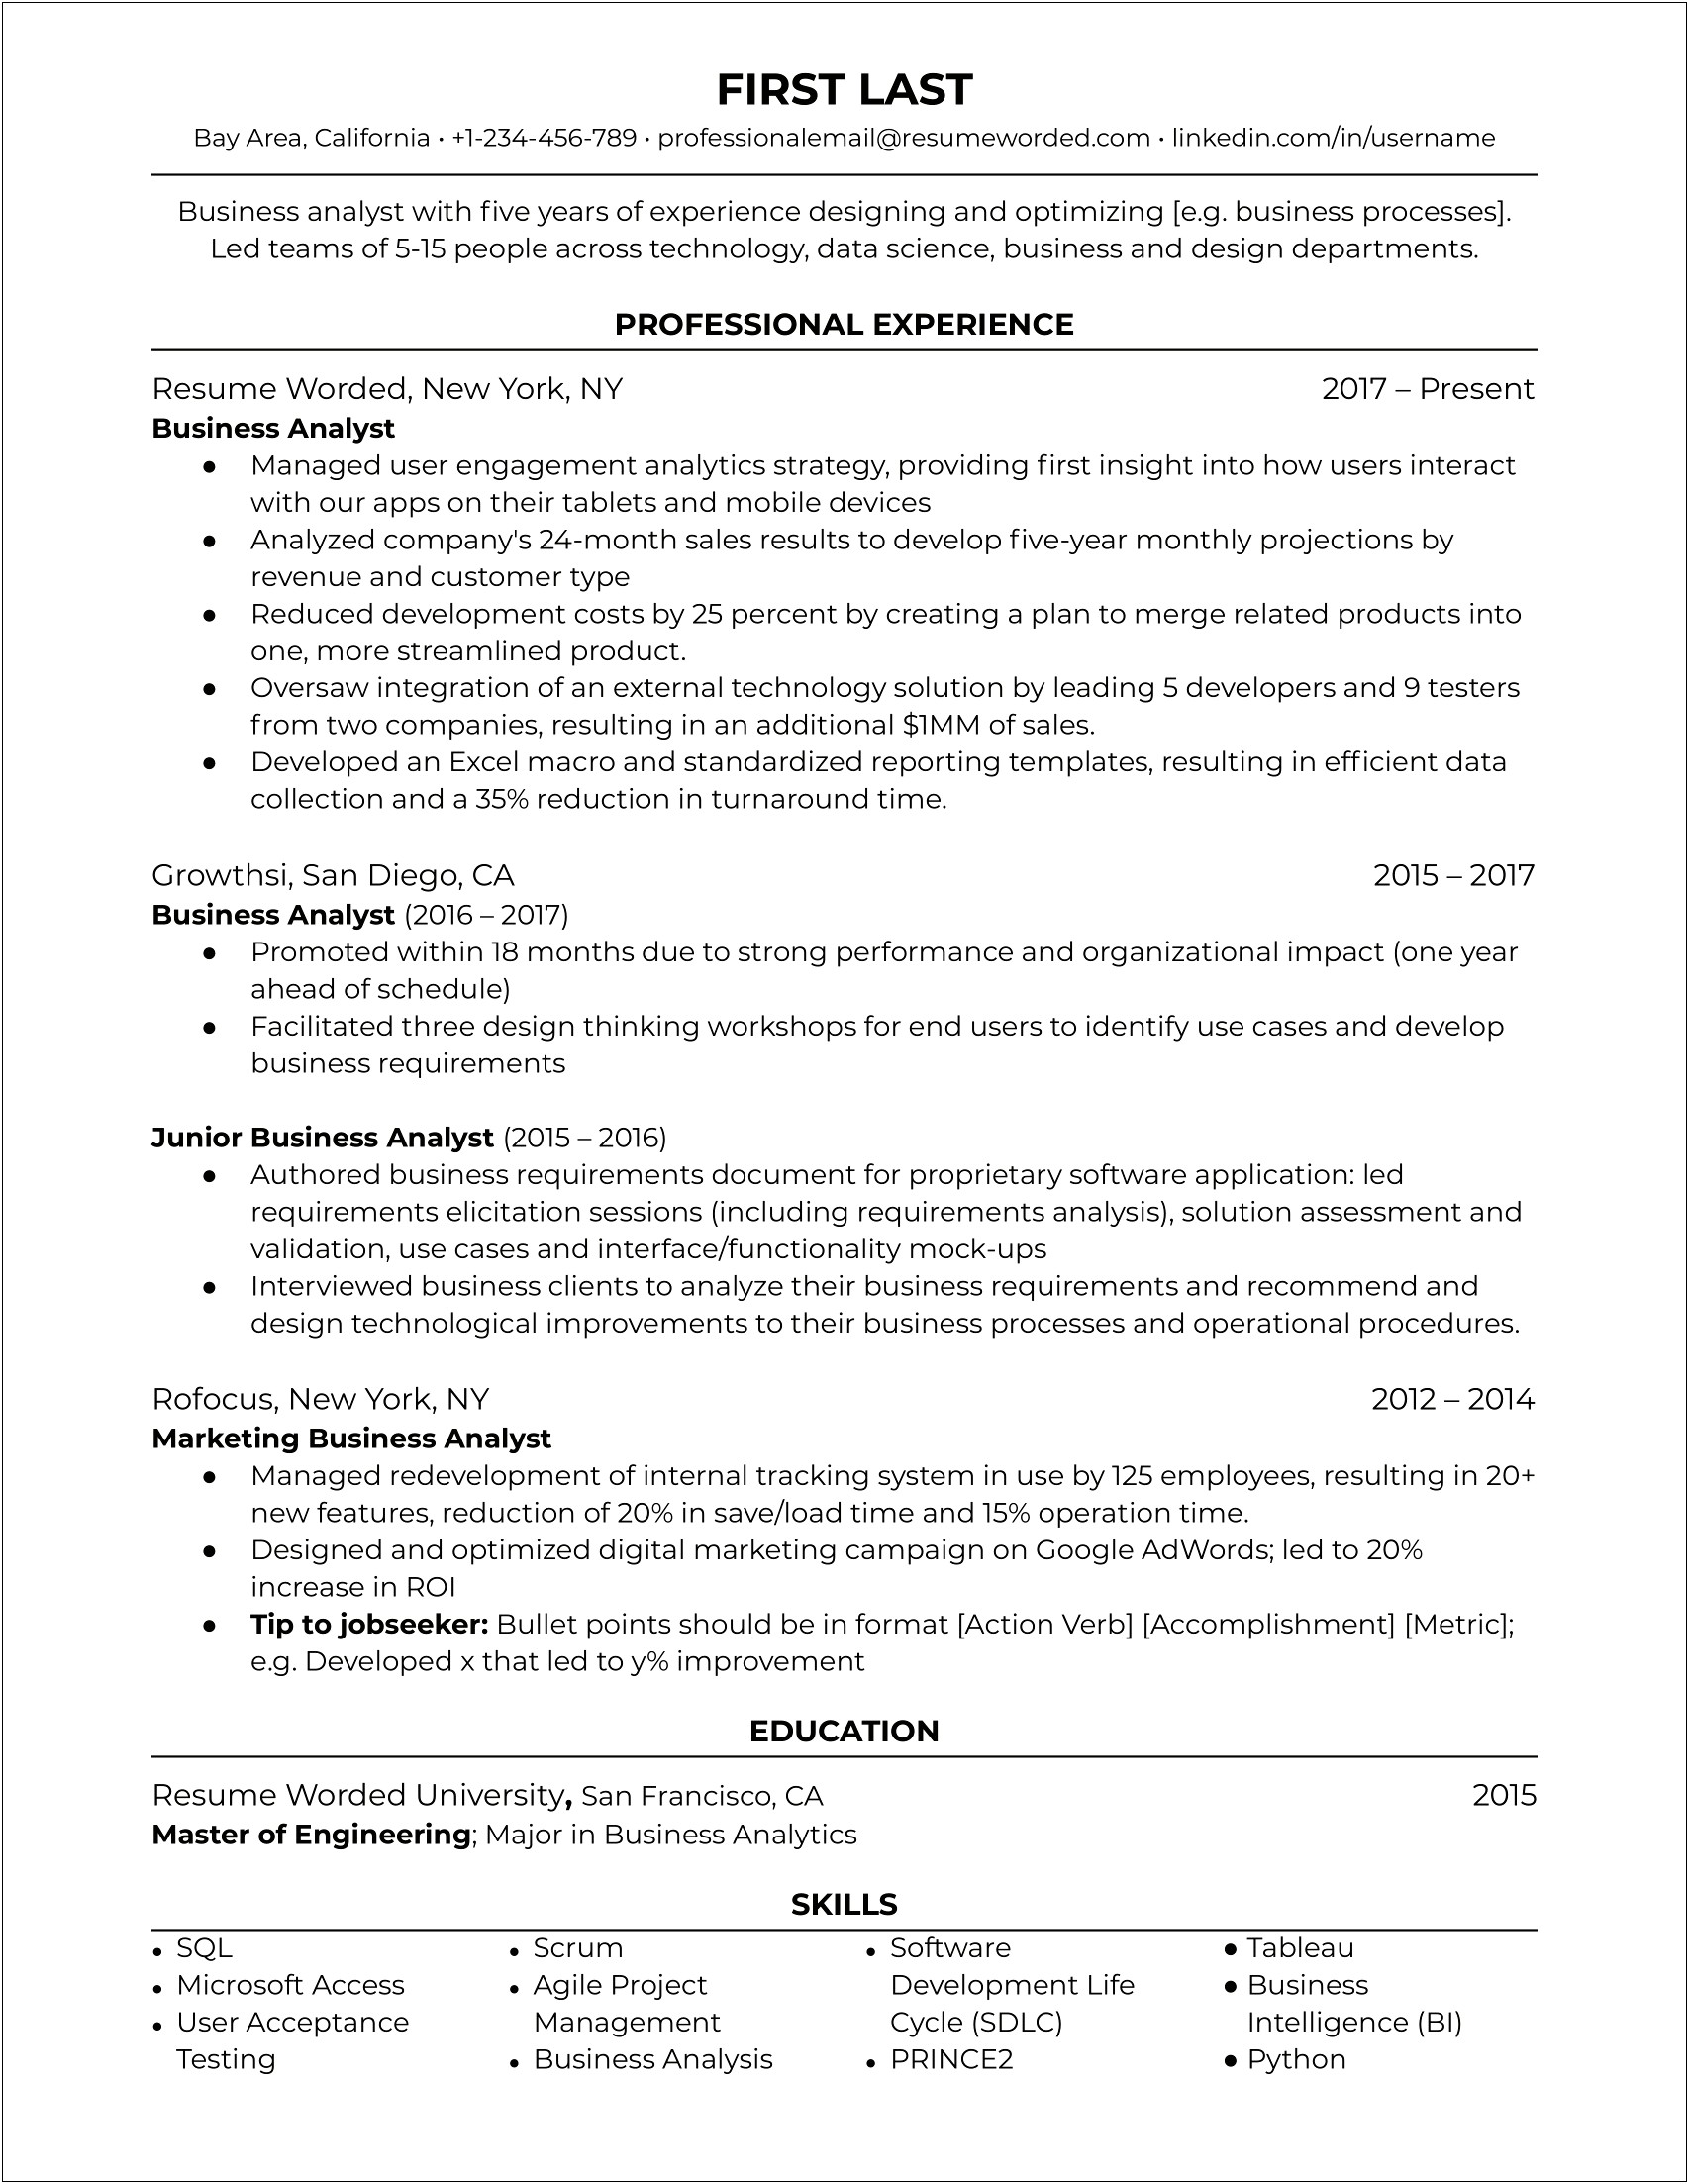 Resume Summary Bullet Points Or Paragraph